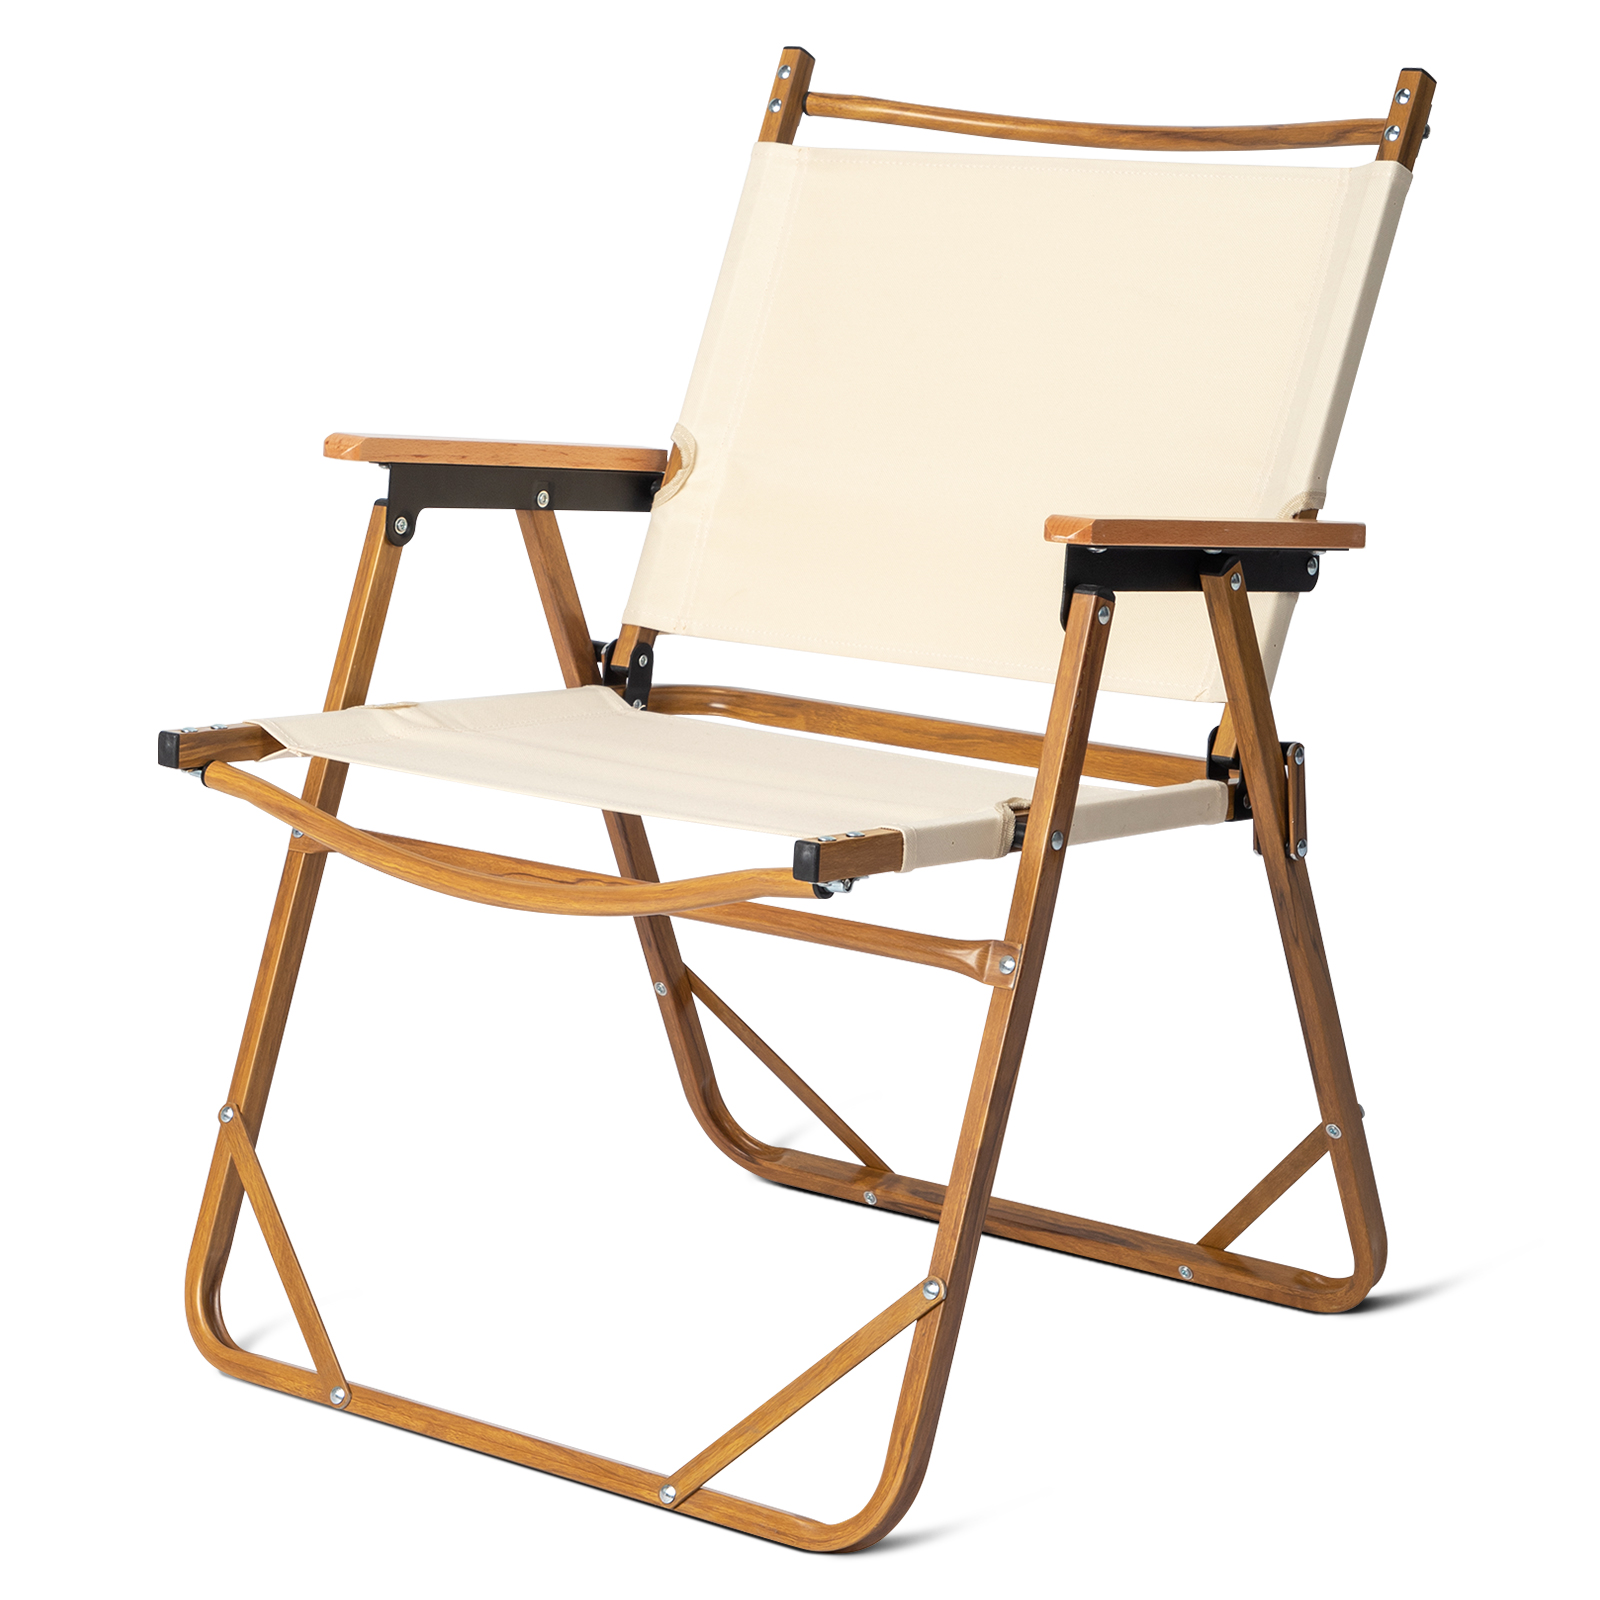 GoDecor Camping Chair Aluminum with Versatile Sports Chair, Outdoor Chair & Lawn Chair Beige - image 1 of 7